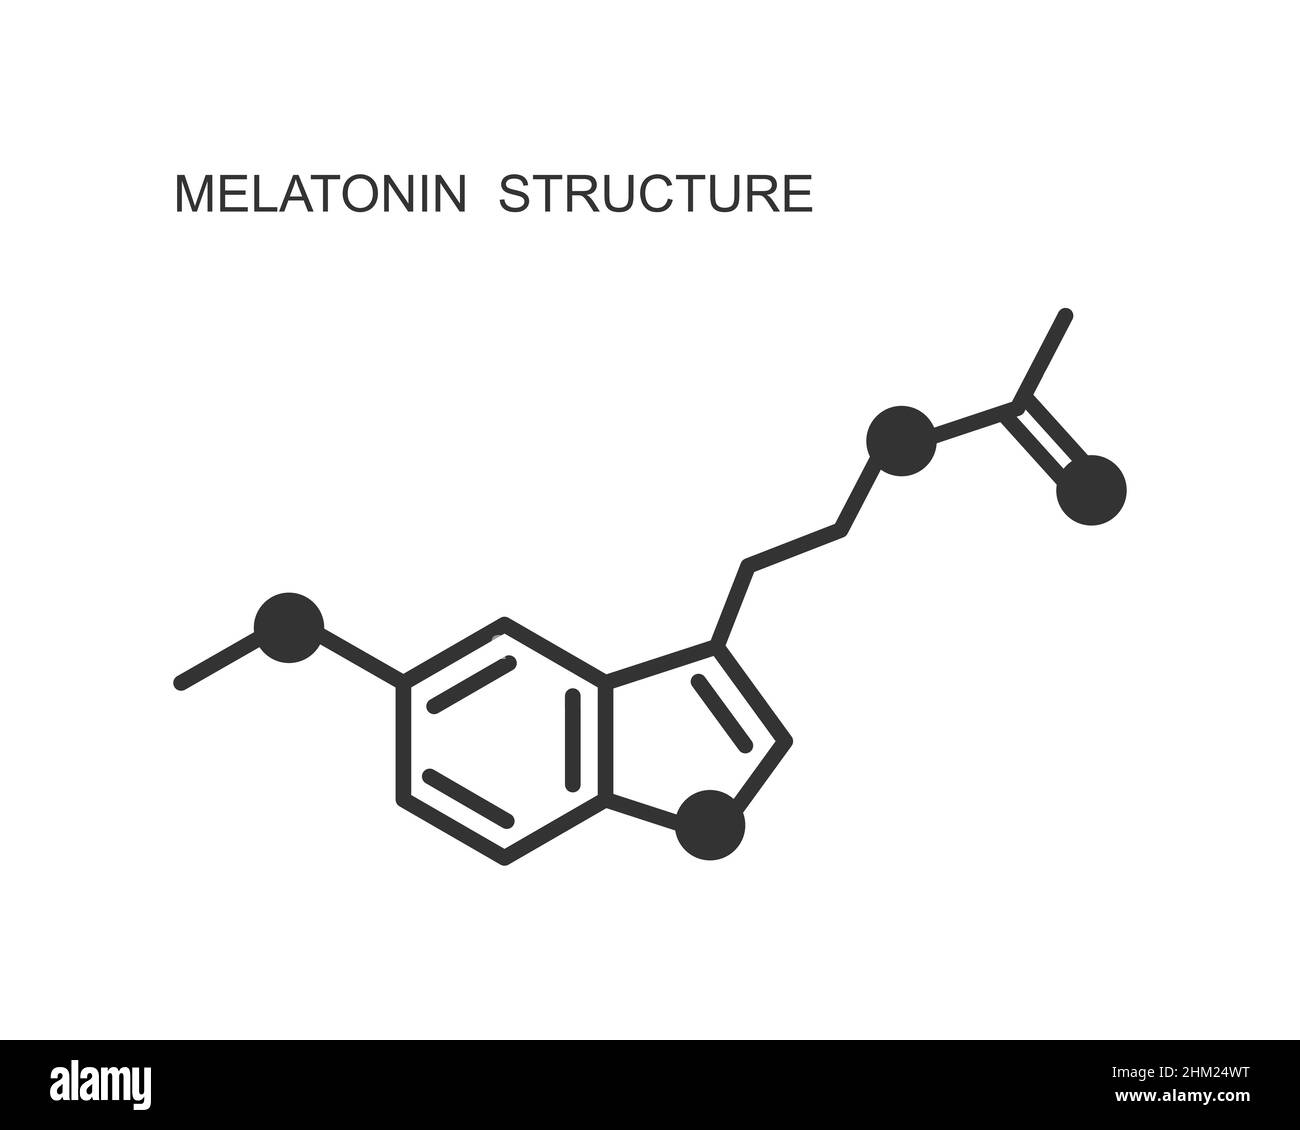 Melatonin icon. Somnolence hormone used for jet lag, insomnia, circadian rhythm disorder therapy. Chemical molecular structure. Sleep-wake cycle regulation sign. Vector outline illustration Stock Vector